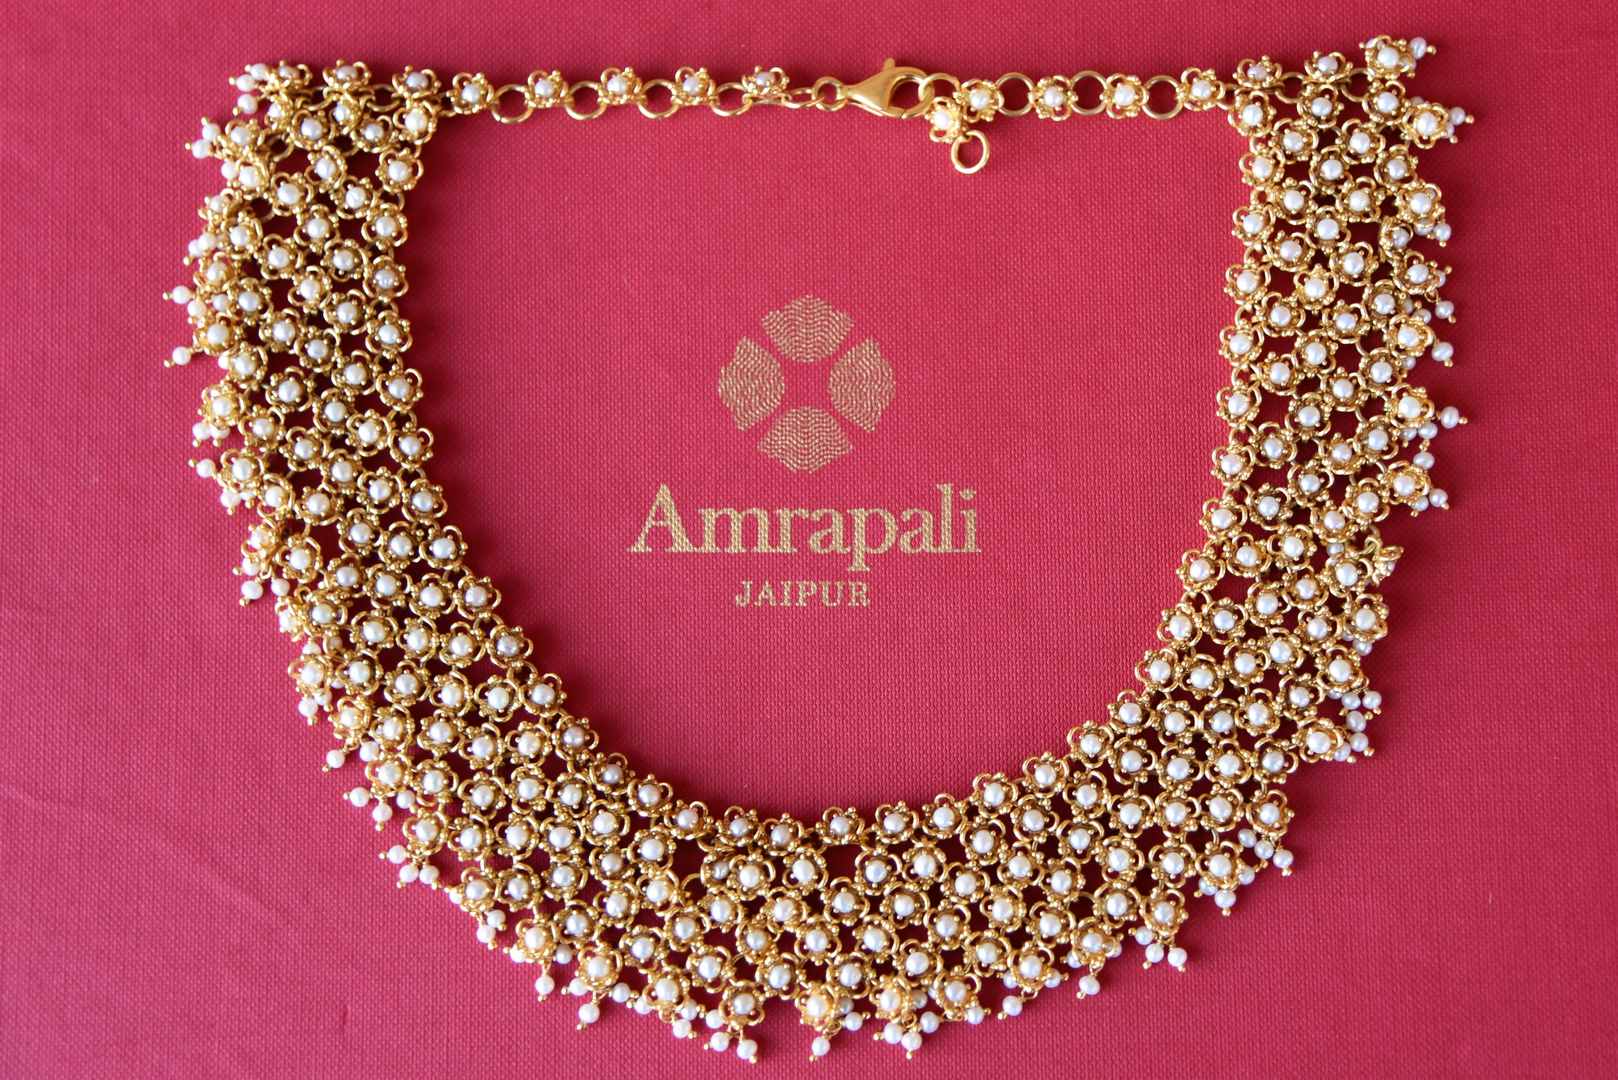 Shop Amrapali silver gold plated pearl necklace online in USA. Add spark to your ethnic attires with beautiful Indian silver gold plated jewelry, wedding jewelry, silver gold plated necklaces from Pure Elegance Indian fashion store in USA.-flatlay